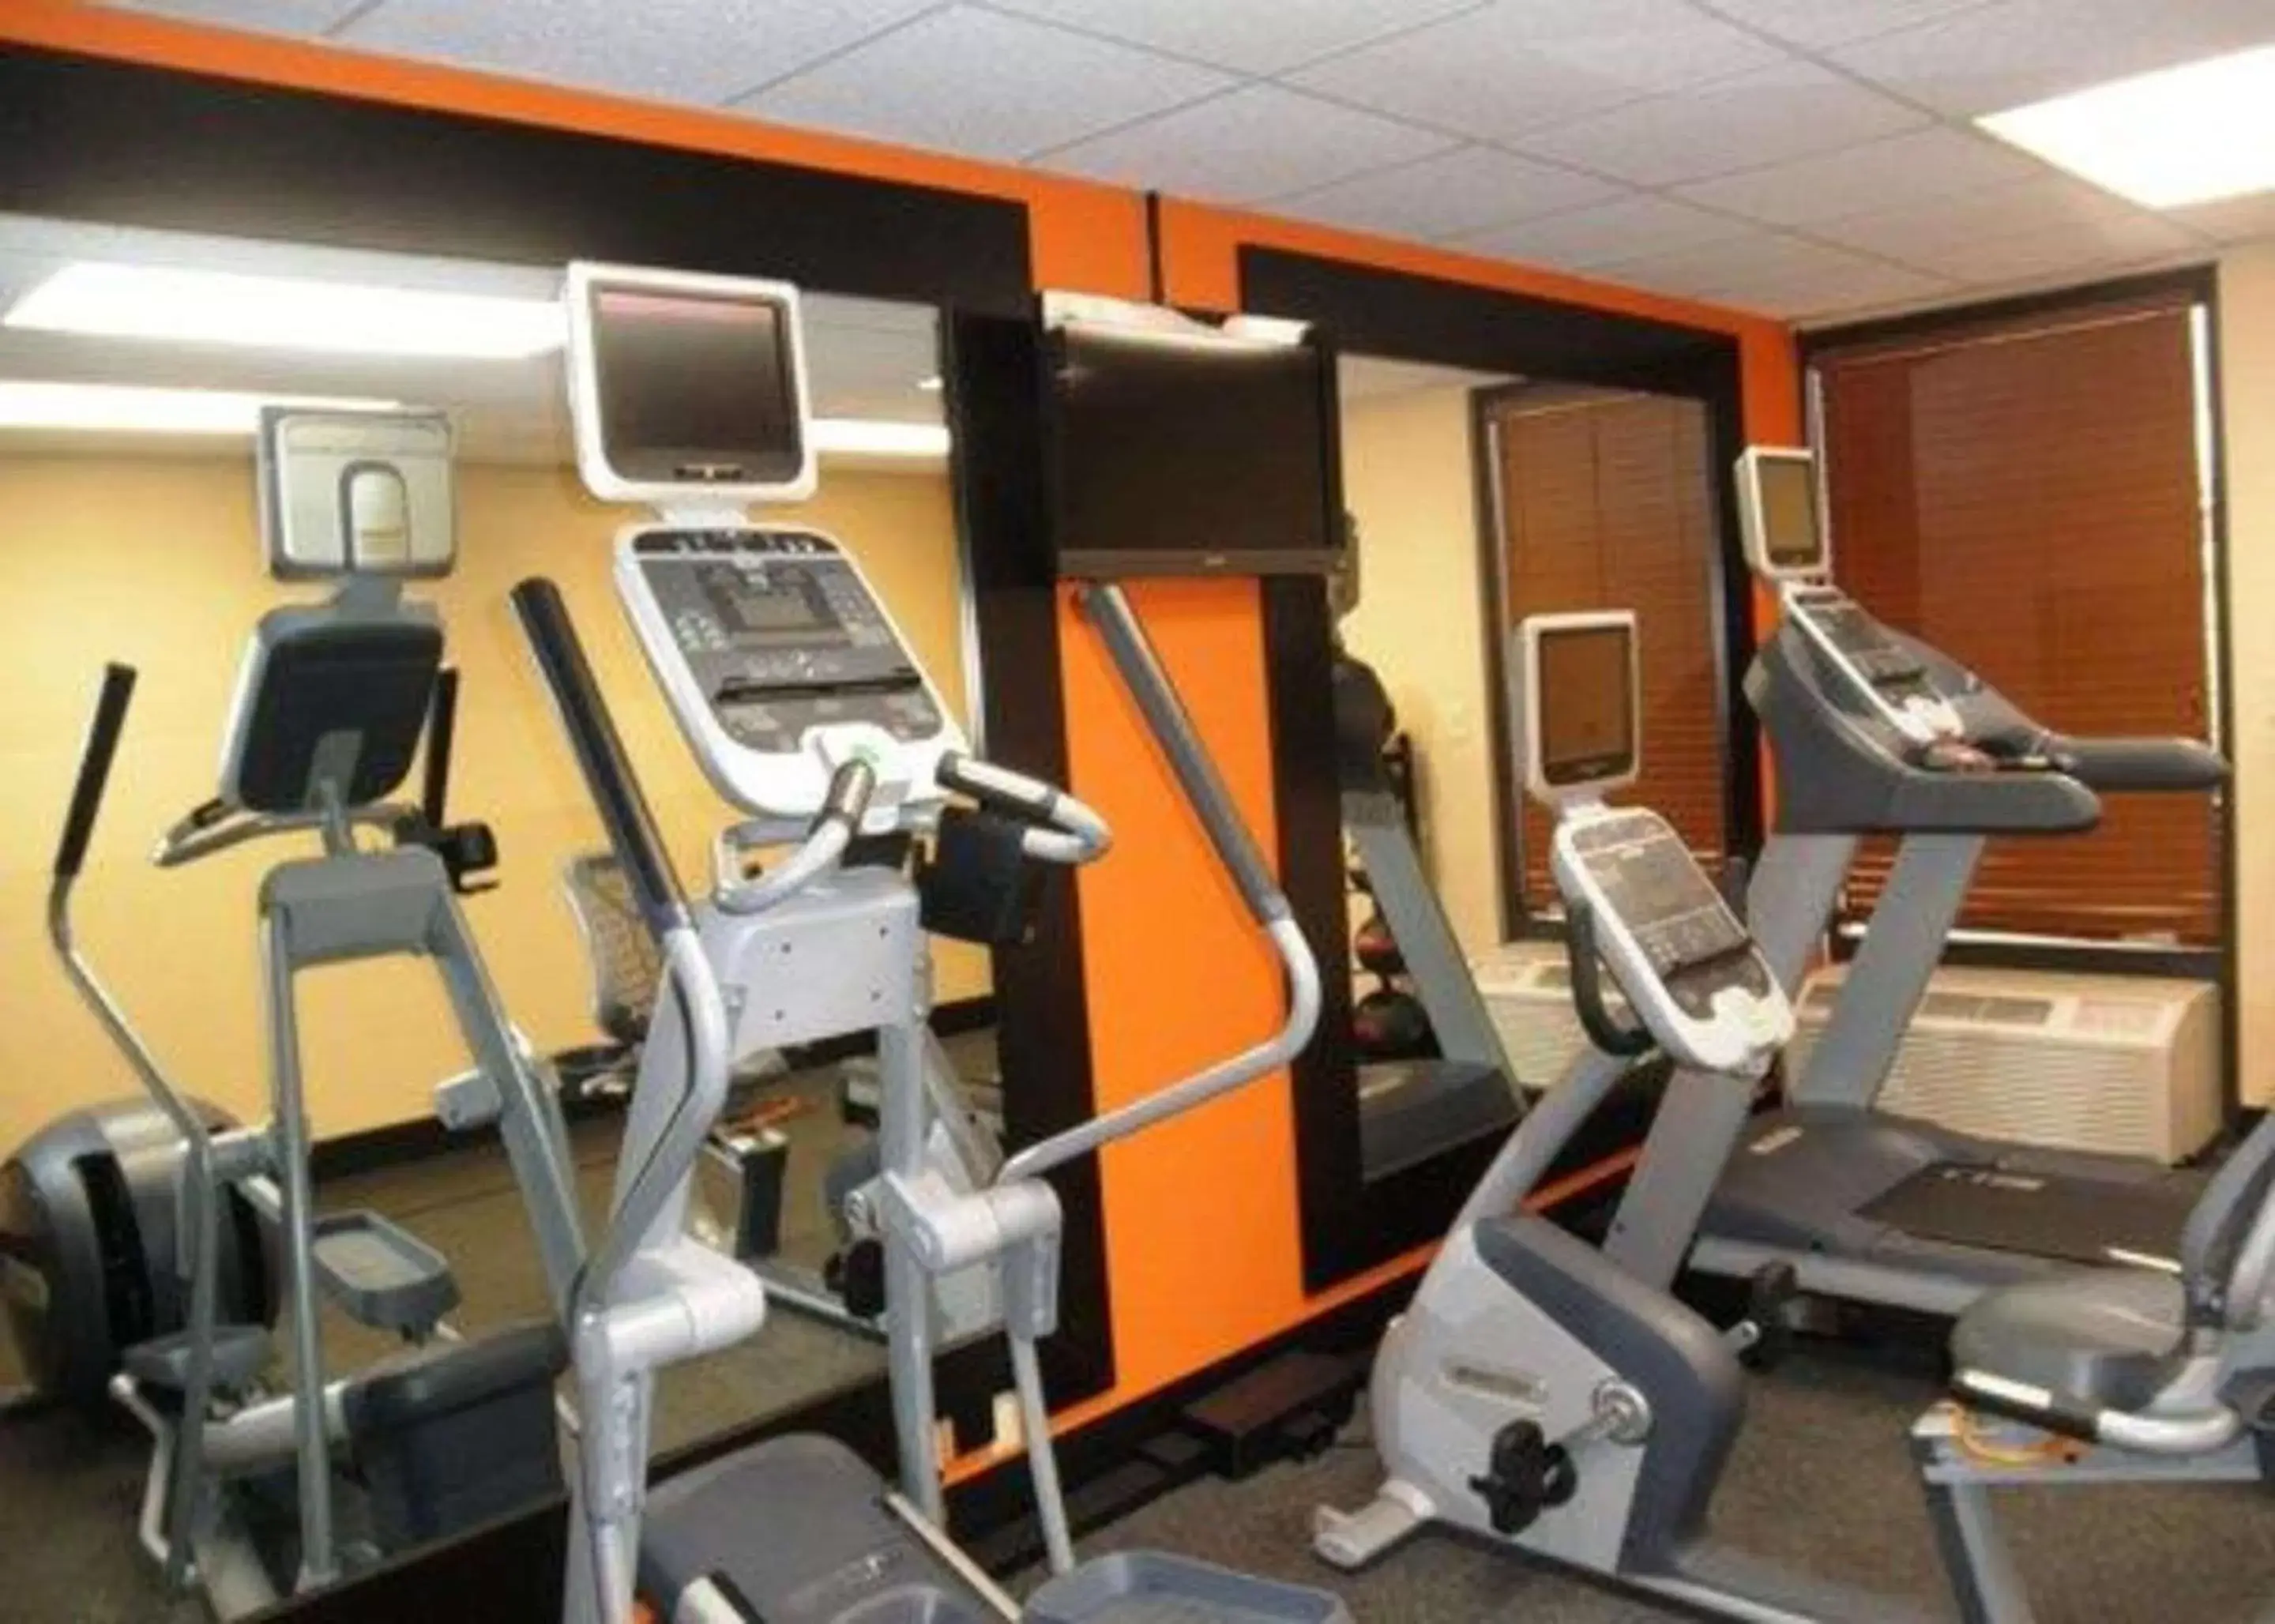 Fitness centre/facilities, Fitness Center/Facilities in Quality Inn Florissant-St Louis